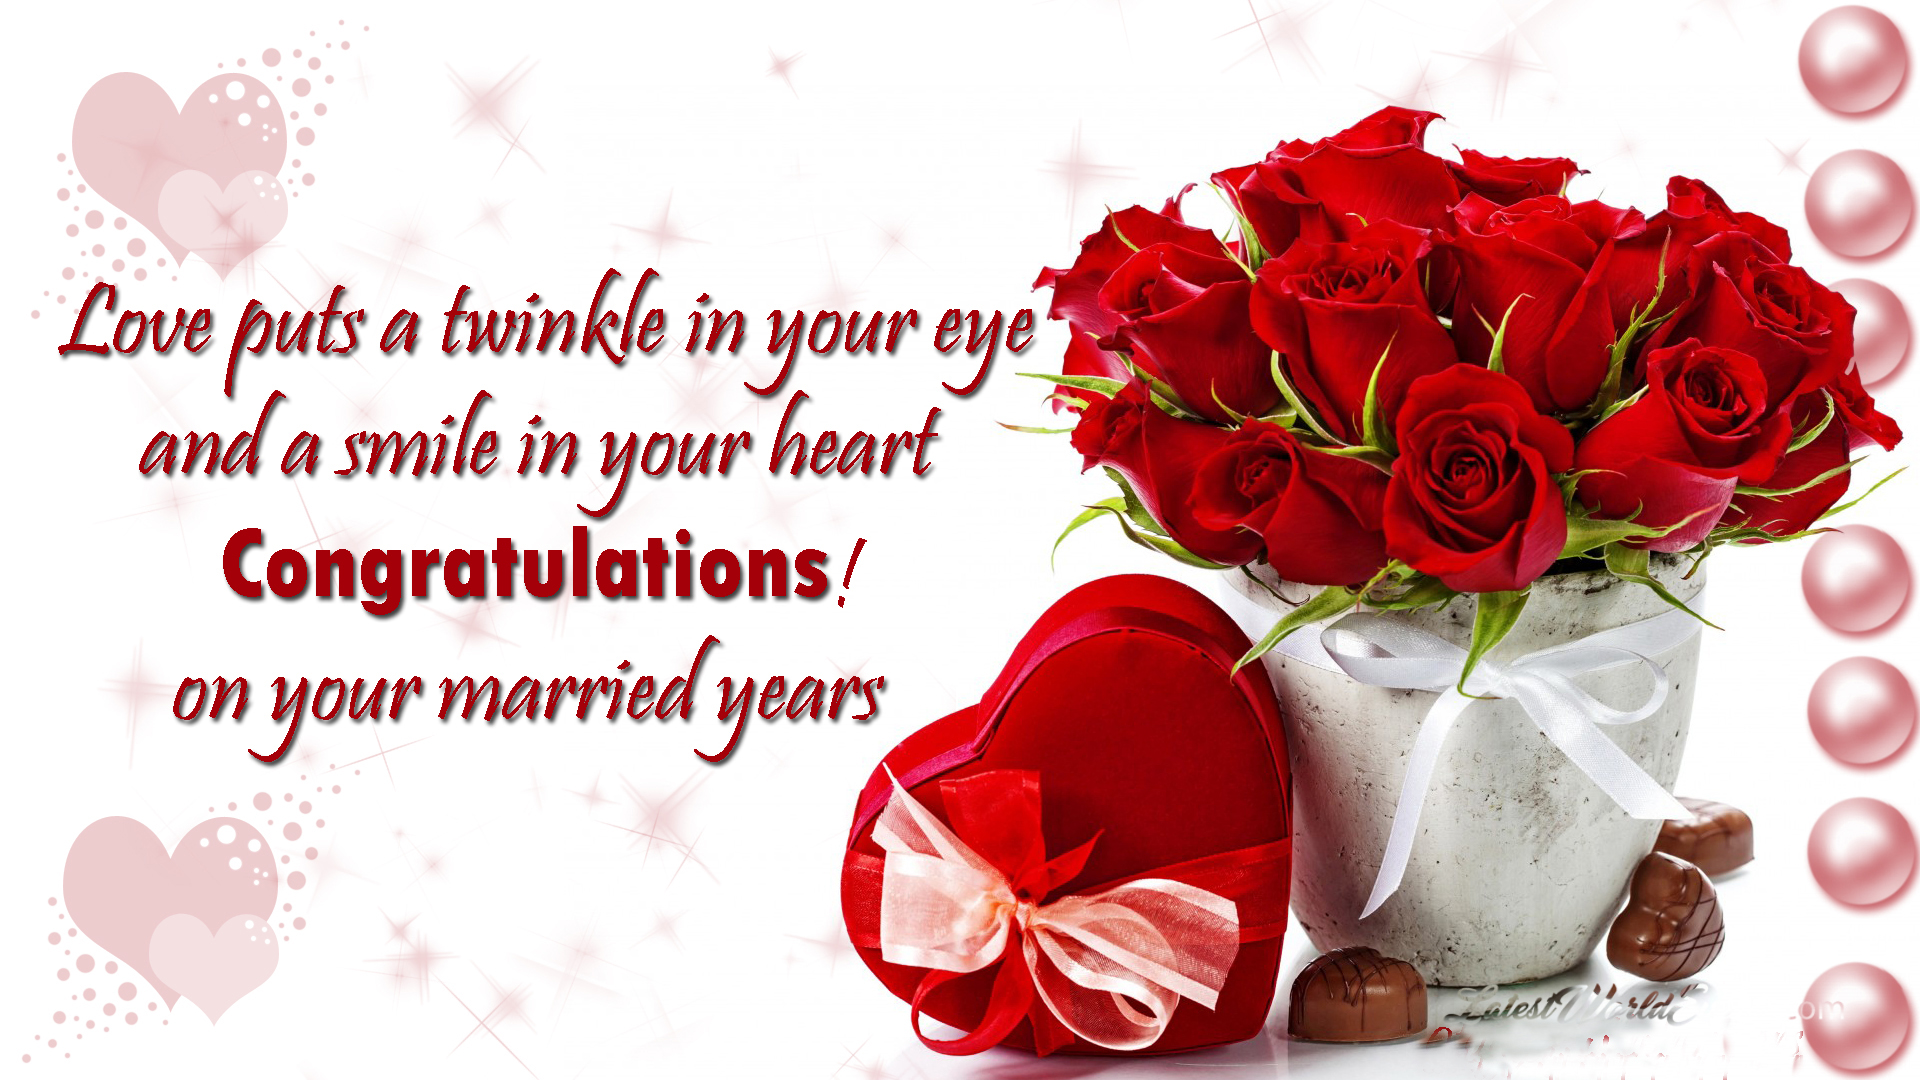 Marriage Anniversary Quotes & Wishes